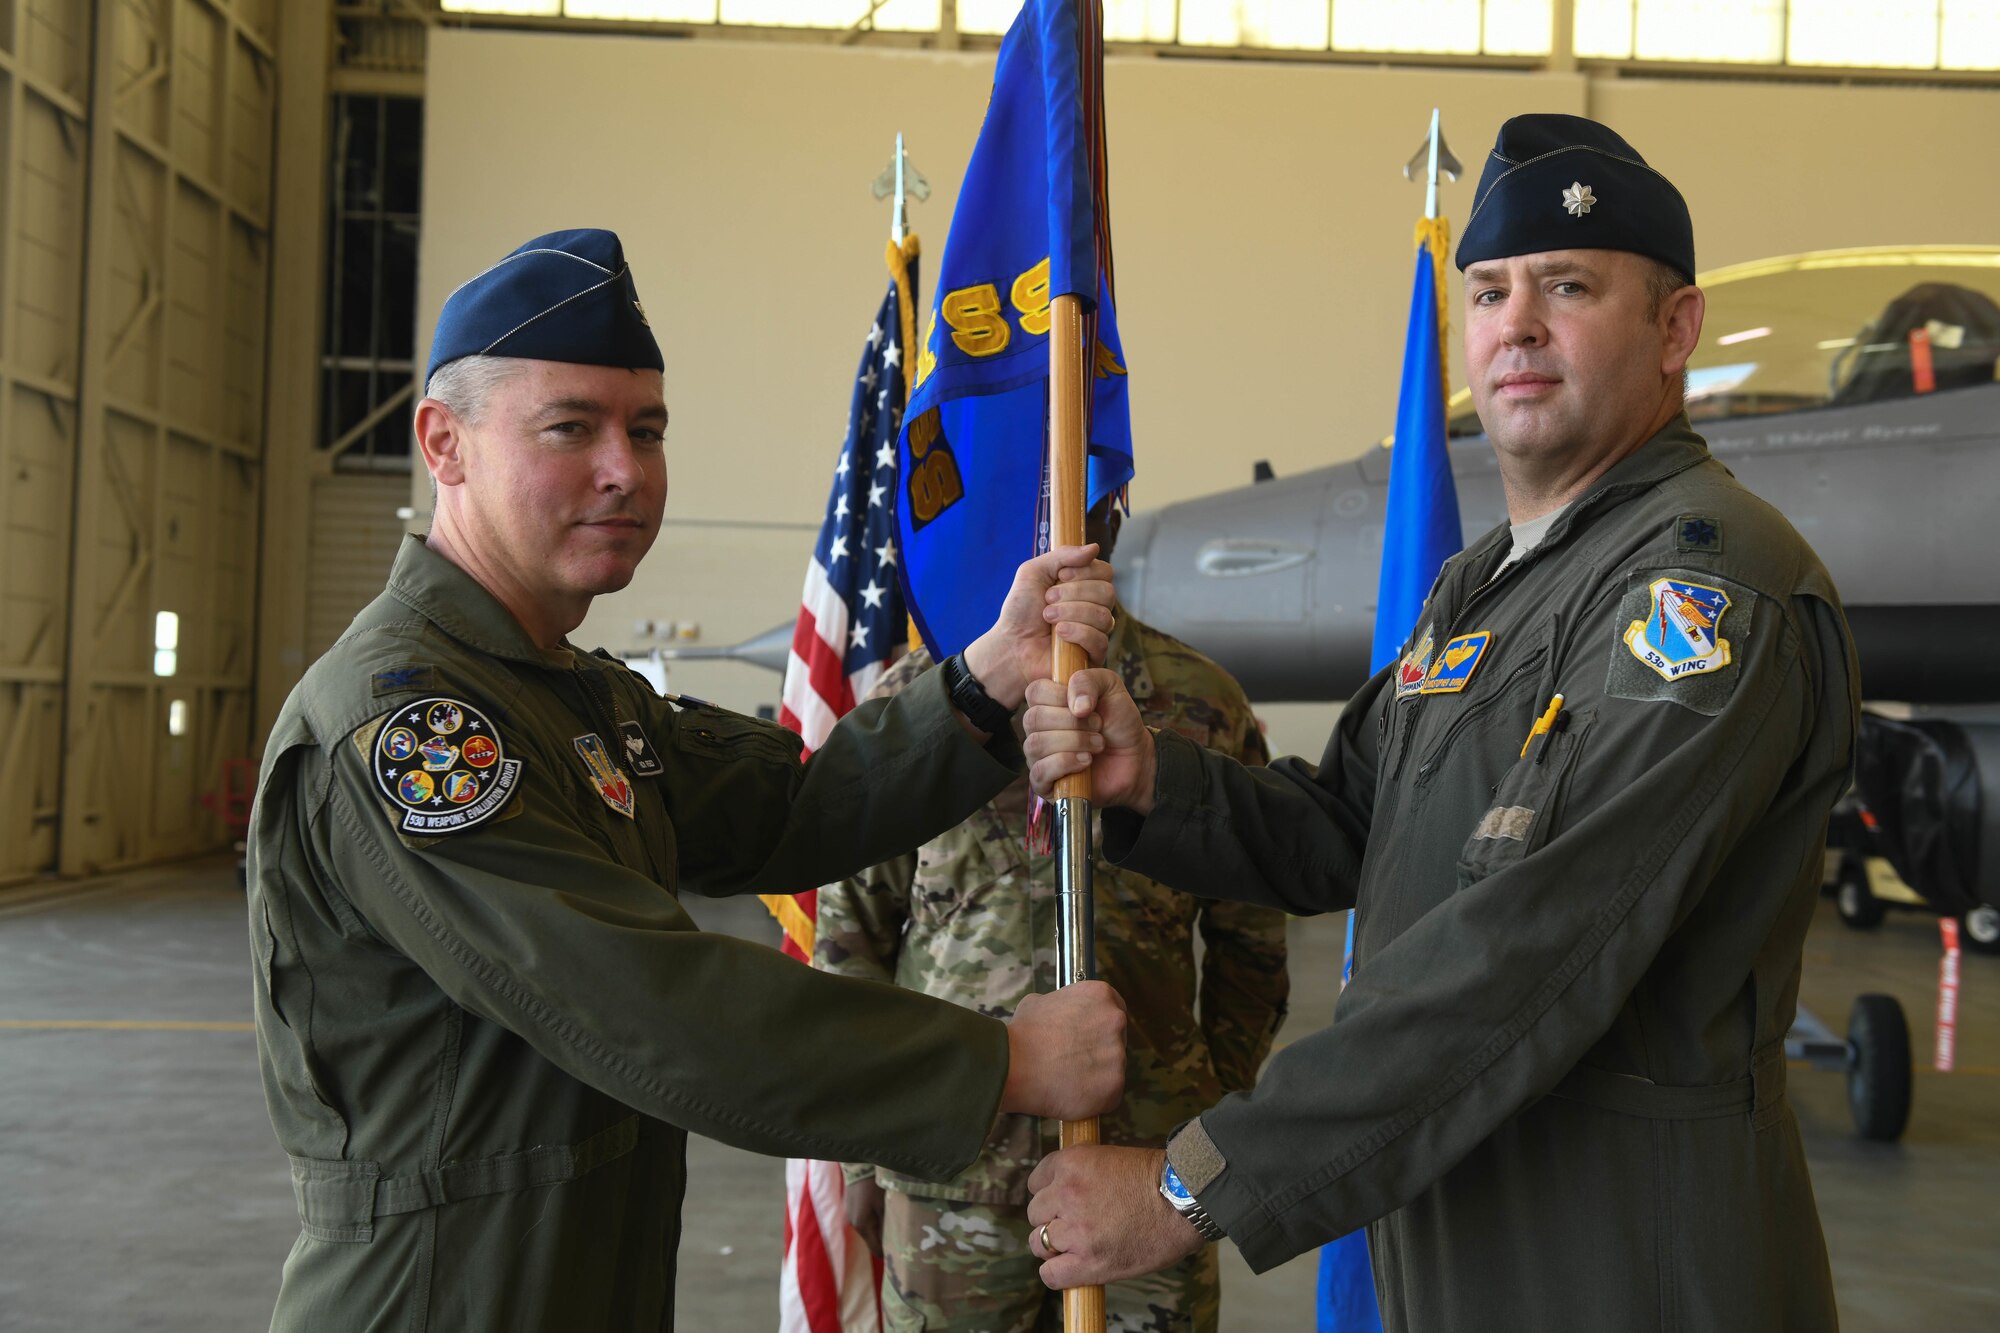 U.S. Air Force Lt. Col. Christopher Byrne, 53rd Test Support Squadron commander, right, assumes command from U.S. Air Force Col. Nicholas Reed, 53rd Weapons Evaluation Group commander, left, at Tyndall Air Force Base, Florida, on June 12, 2020. U.S. Air Force Senior Master Sgt. Shaun Barnette, 53rd Test Support Squadron superintendent, looks on. (U.S. Air Force photo by Airman Anabel Del Valle)